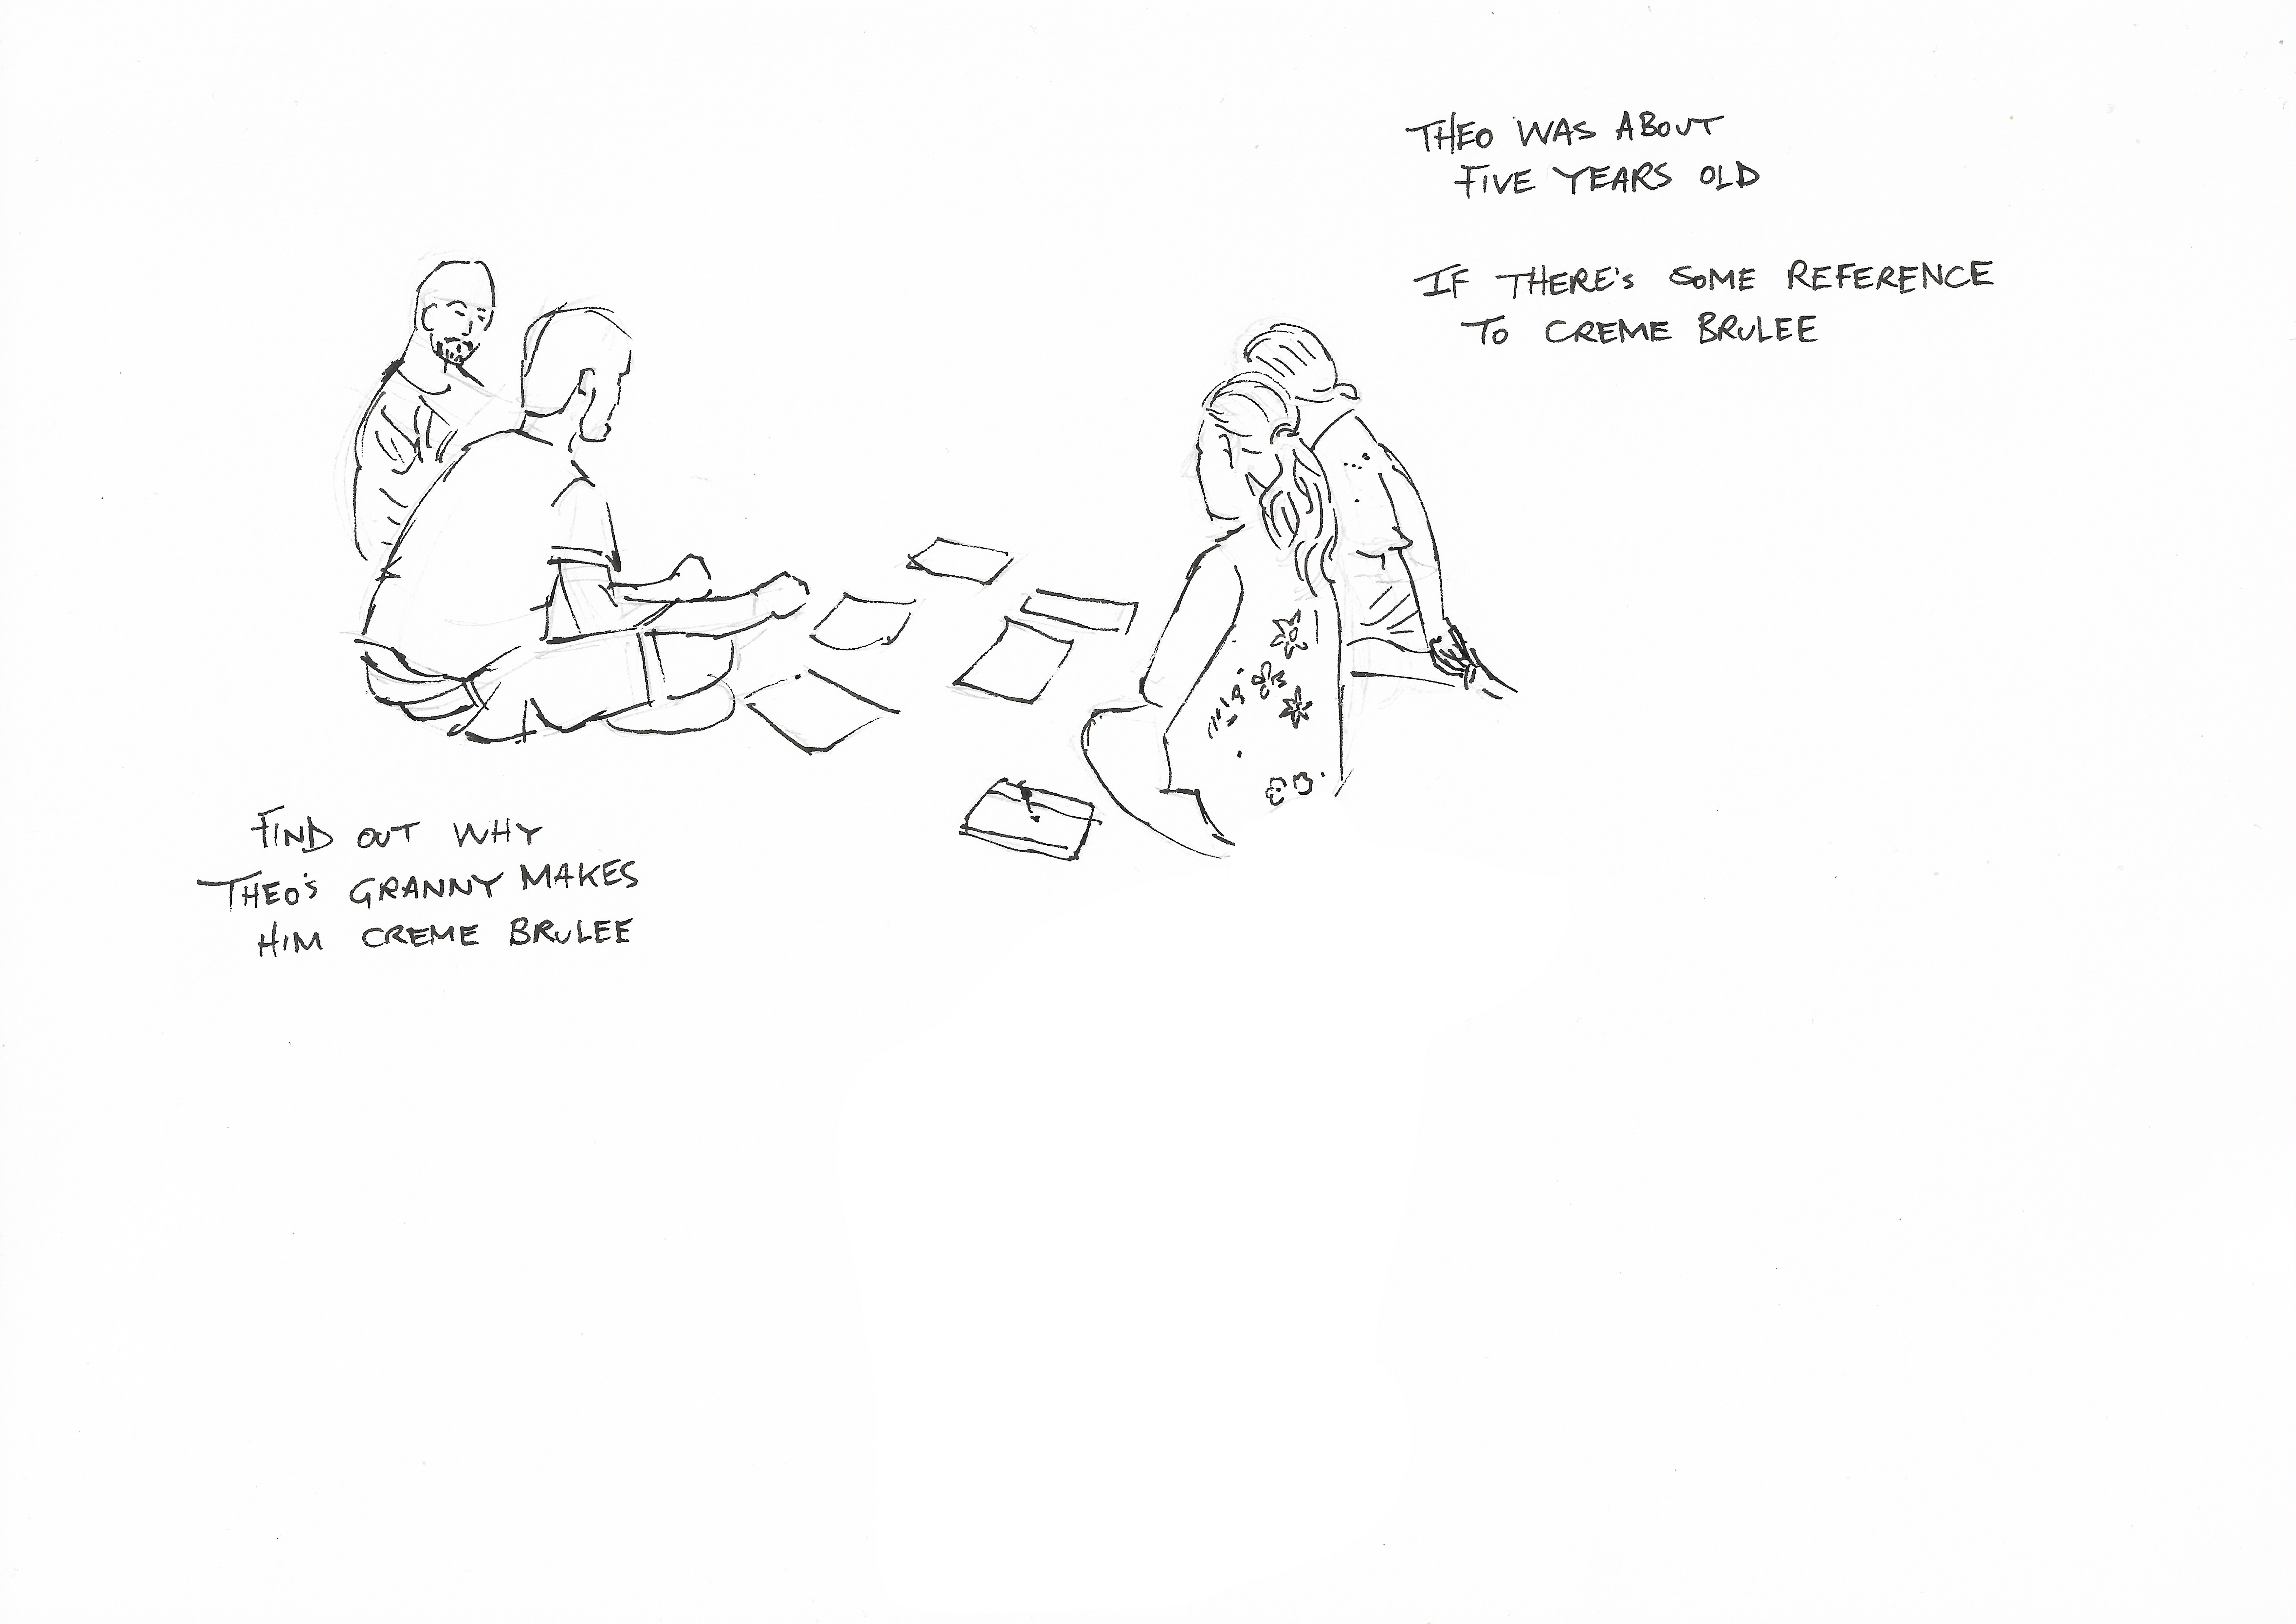 Drawing of people discussing